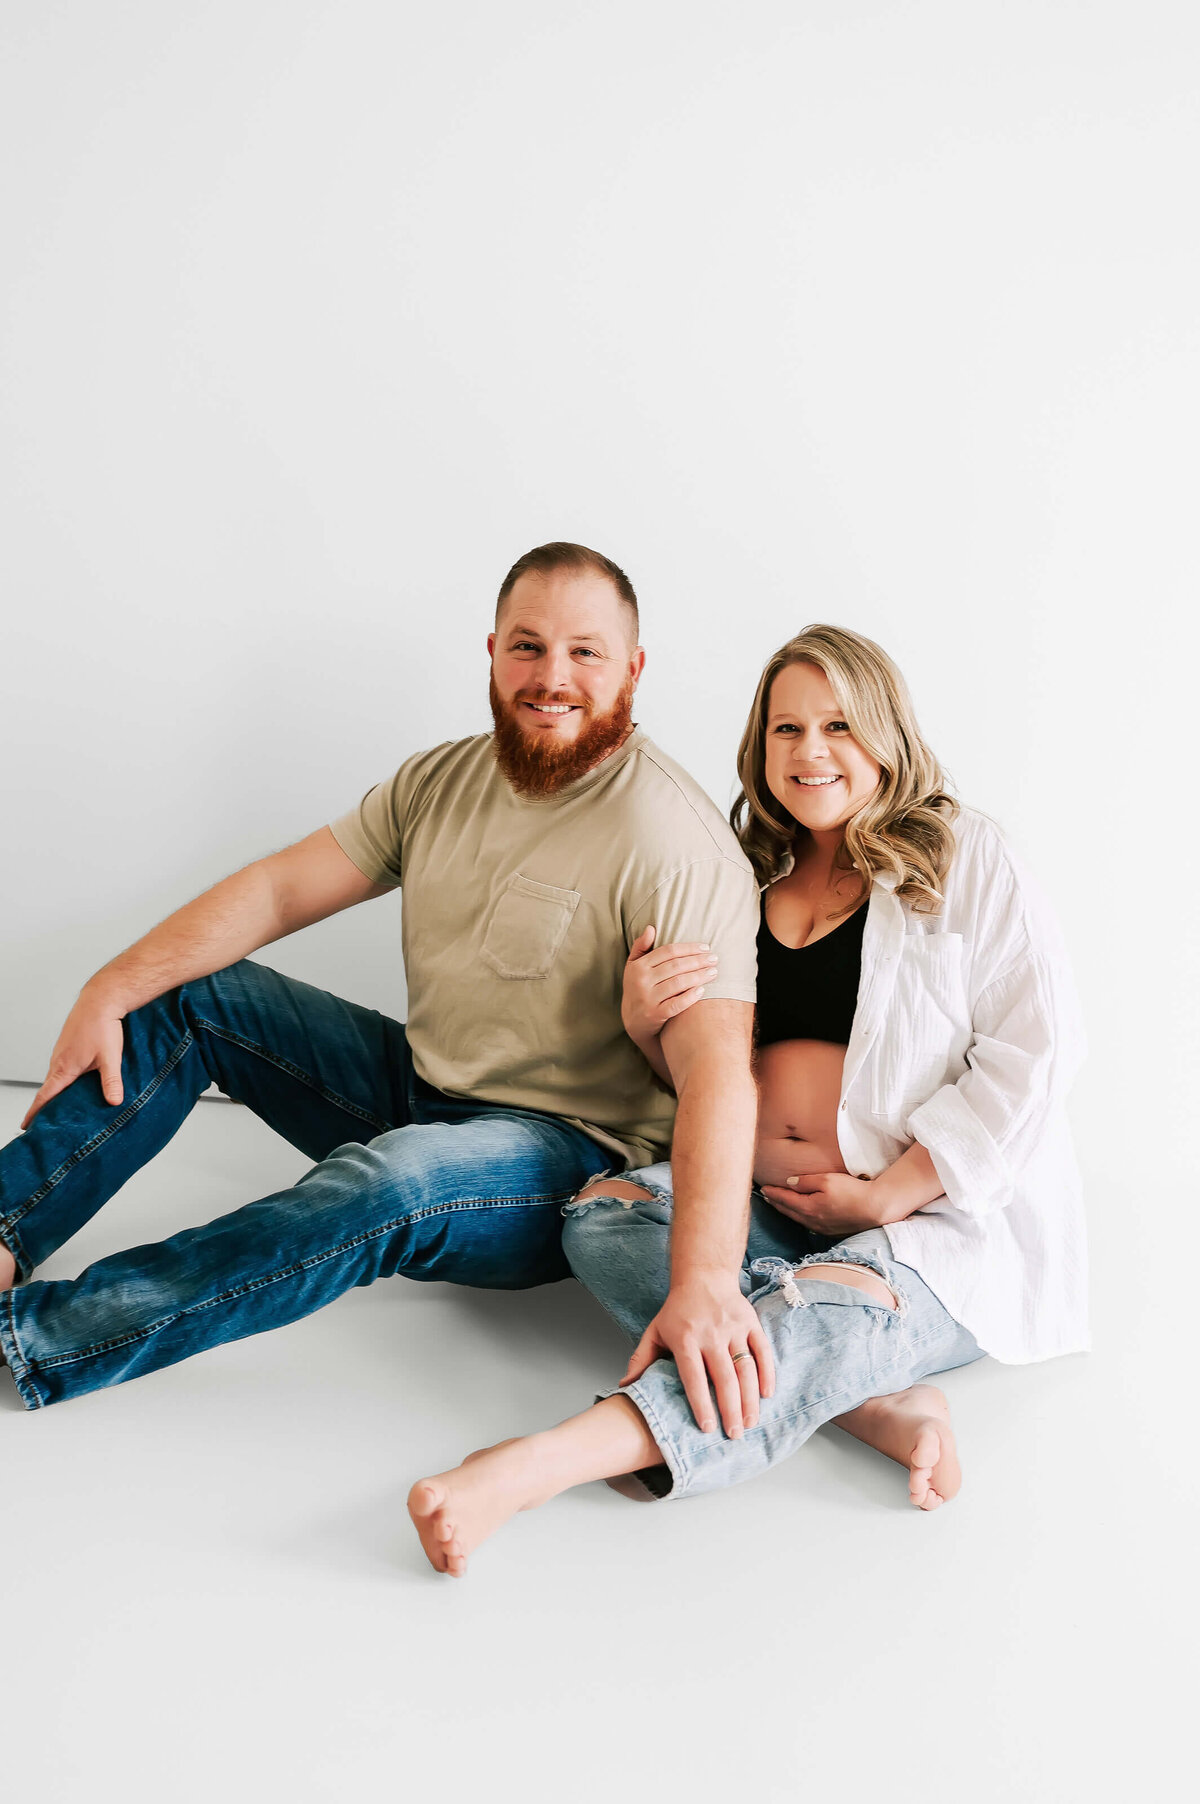 husband and wife sitting on ground smiling holding pregnant belly enjoying maternity pictures in Branson MO